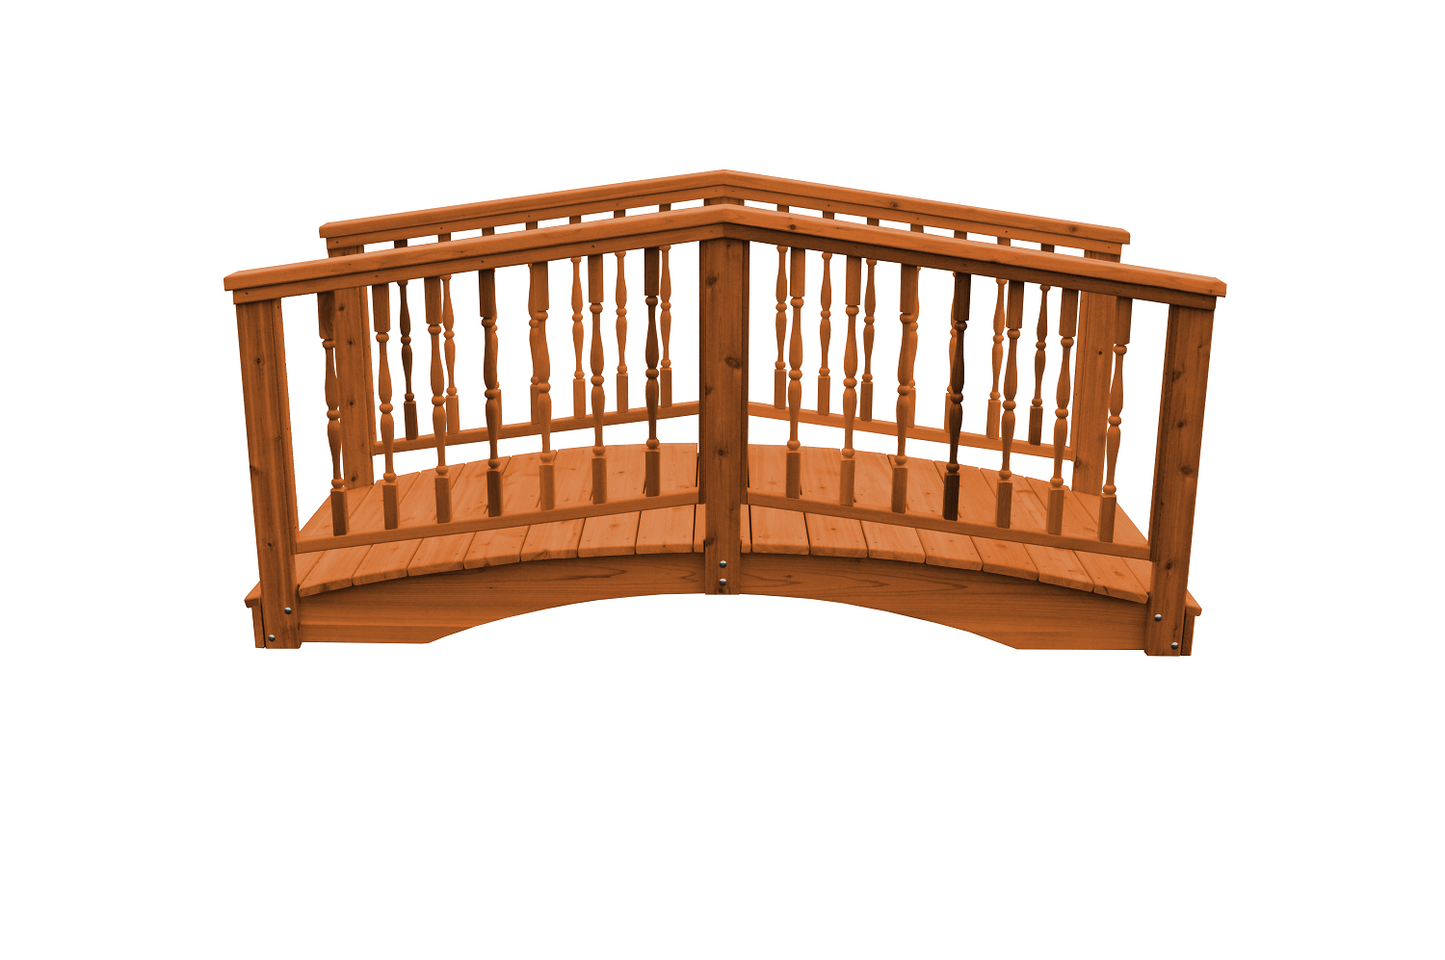 A&L Furniture Co. Western Red Cedar 3' x 10' Spindle Bridge - LEAD TIME TO SHIP 4 WEEKS OR LESS